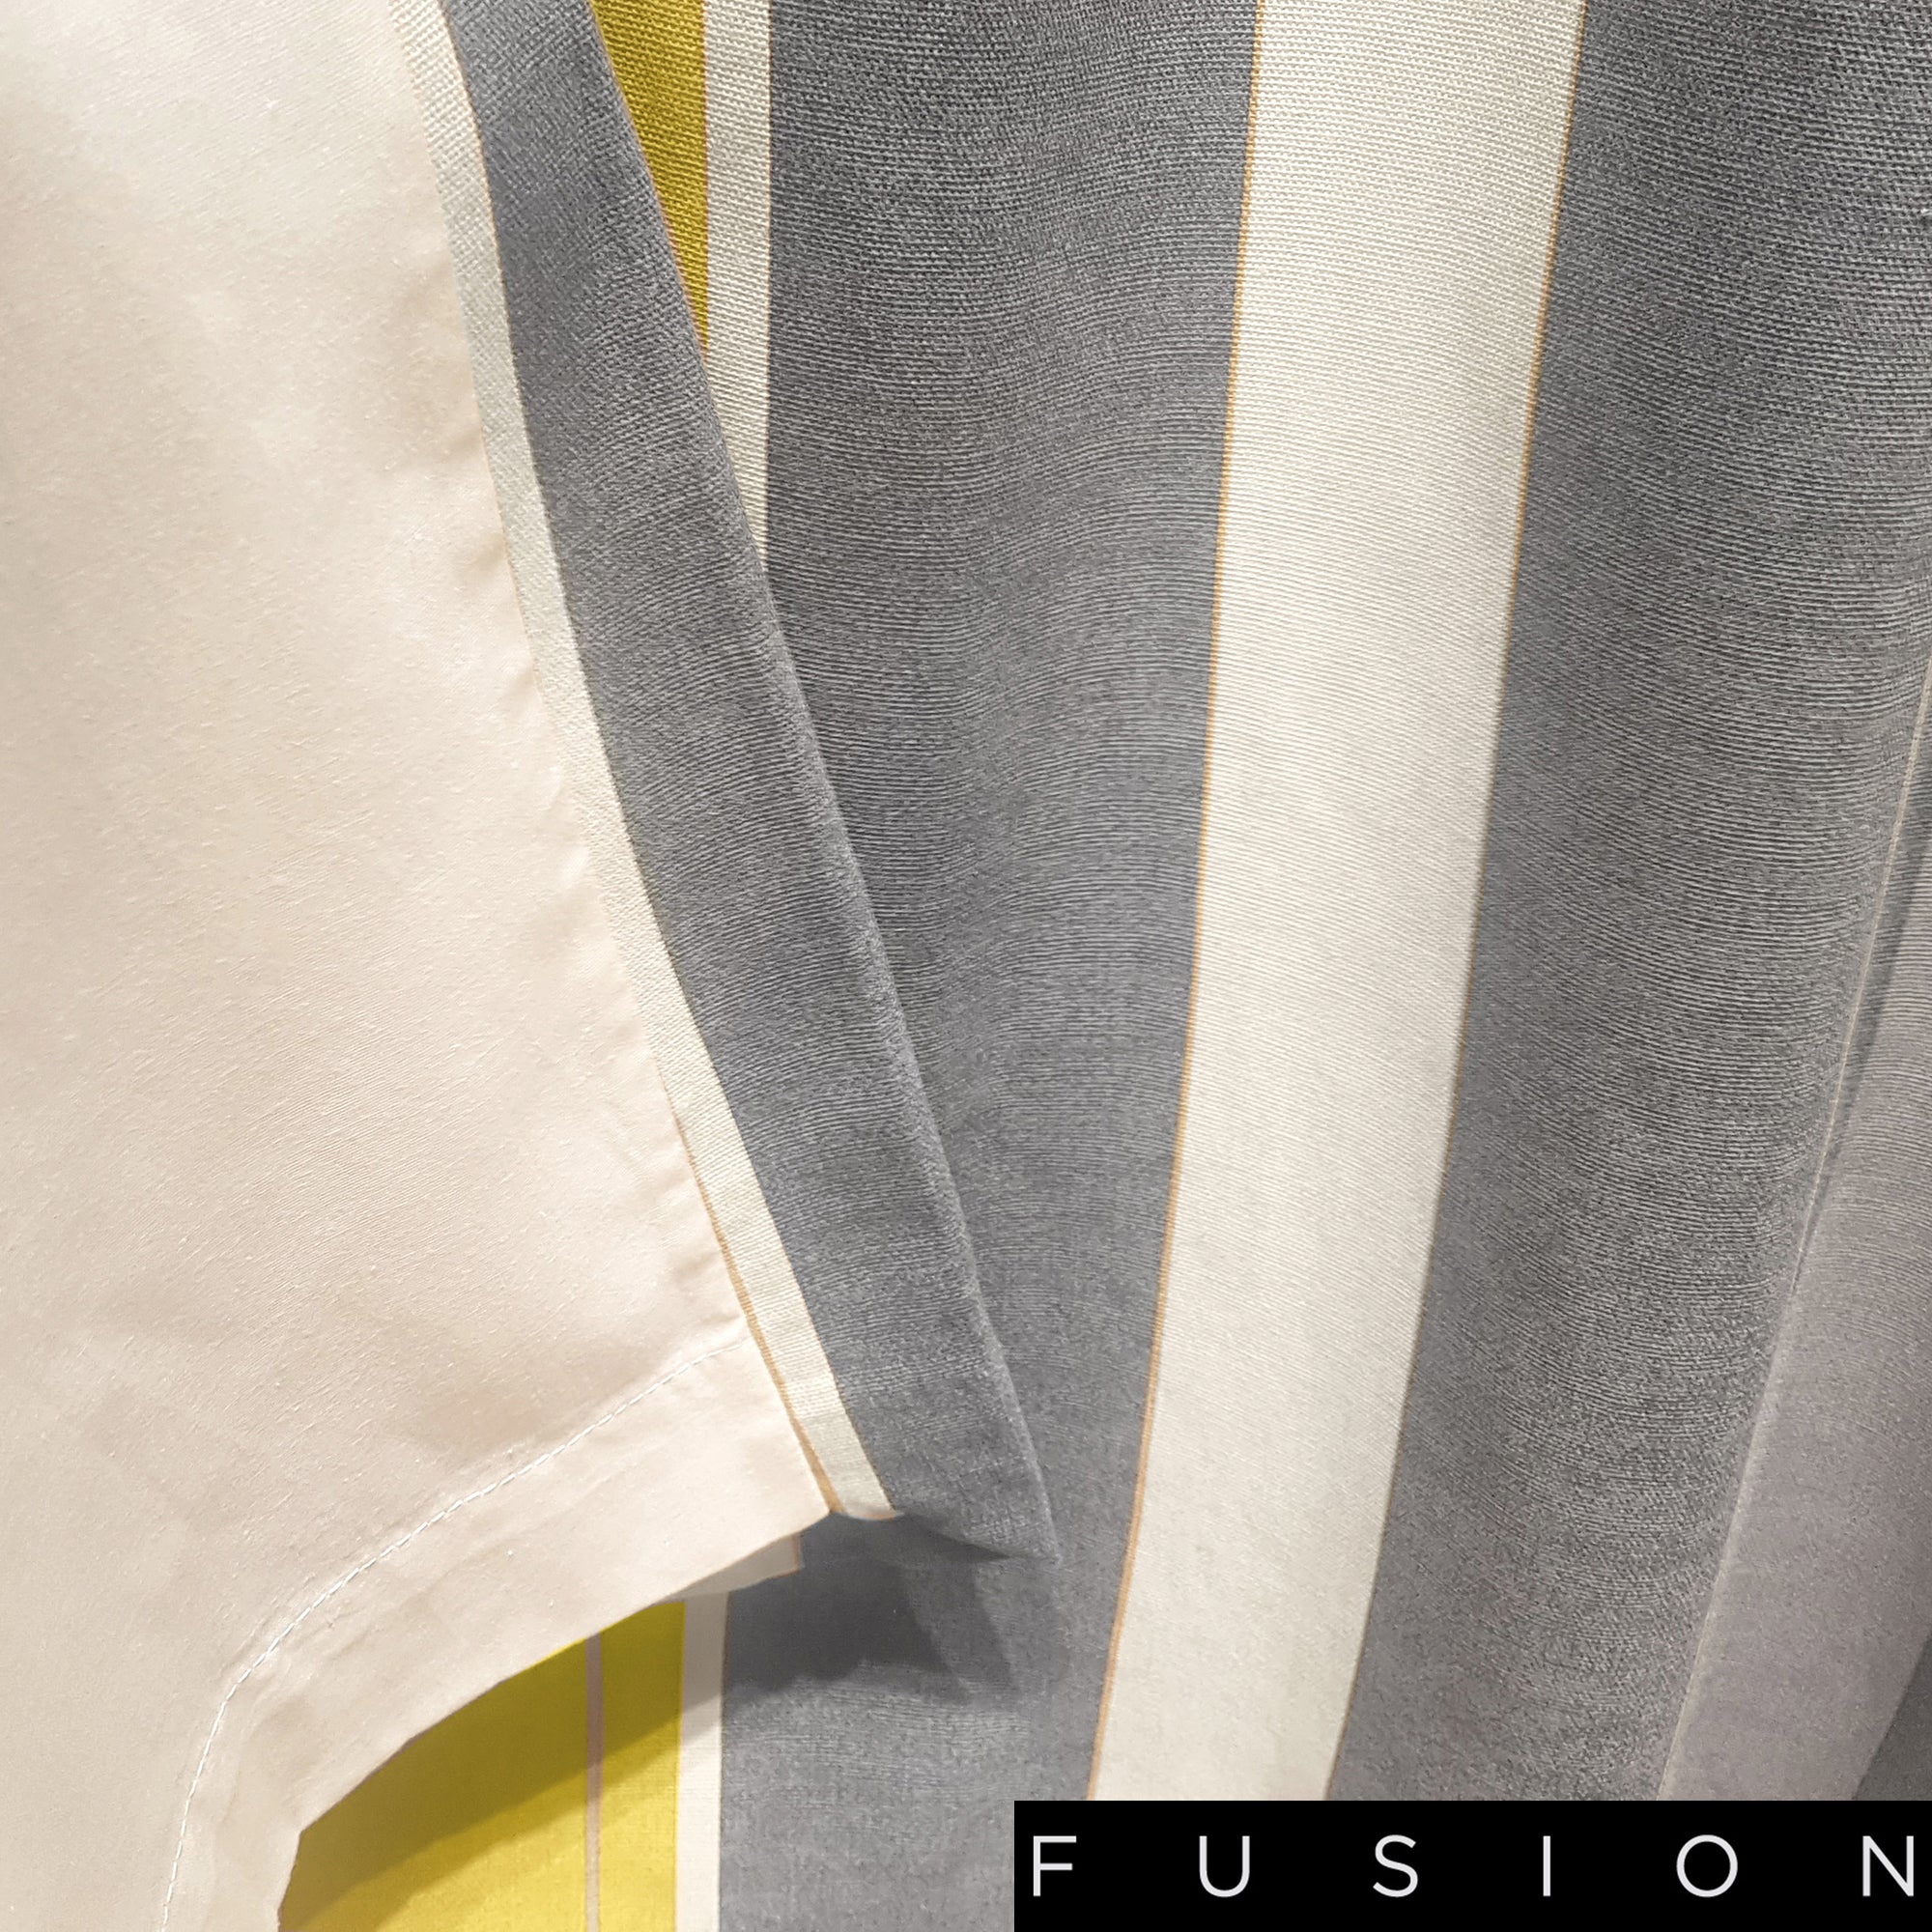 Whitworth Stripe - 100% Cotton Lined Eyelet Curtains in Ochre - by Fusion